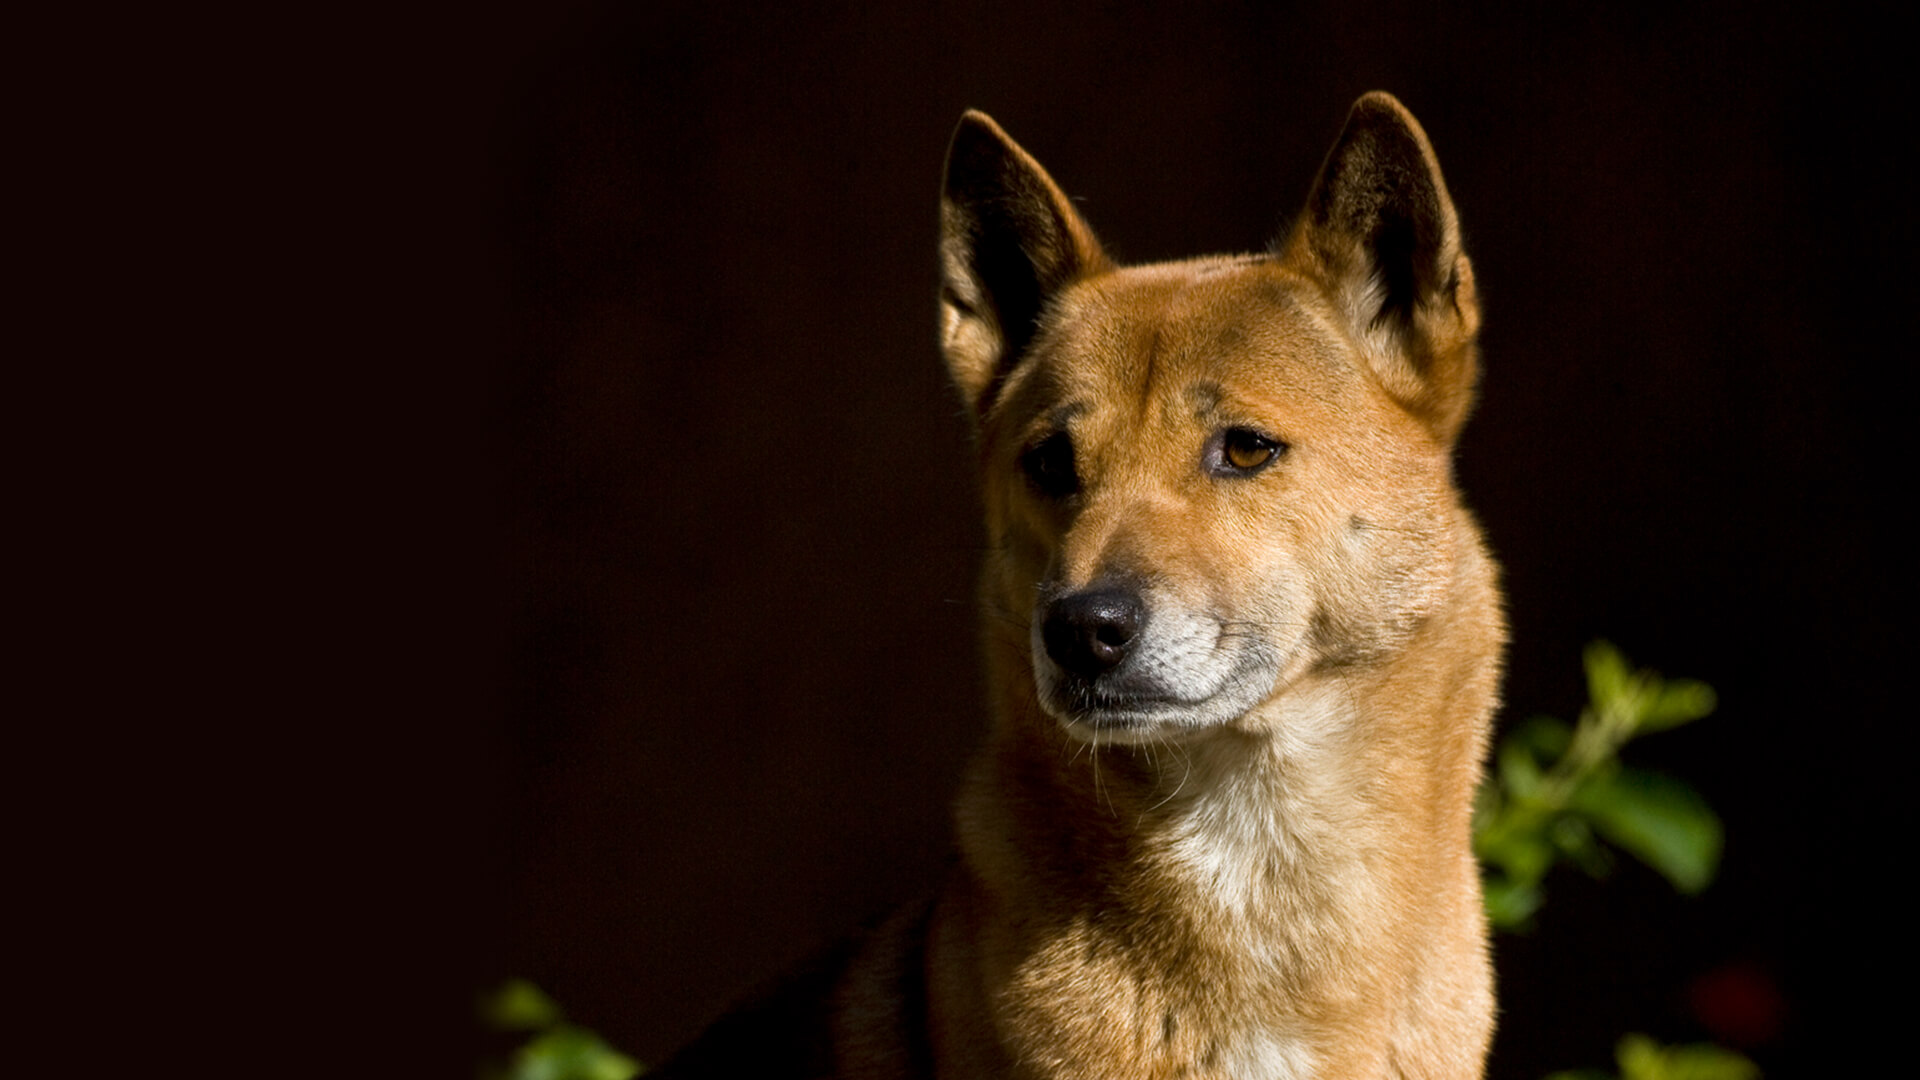 New Guinea singing dog looks off to the left as his background is darkened by midday shadows